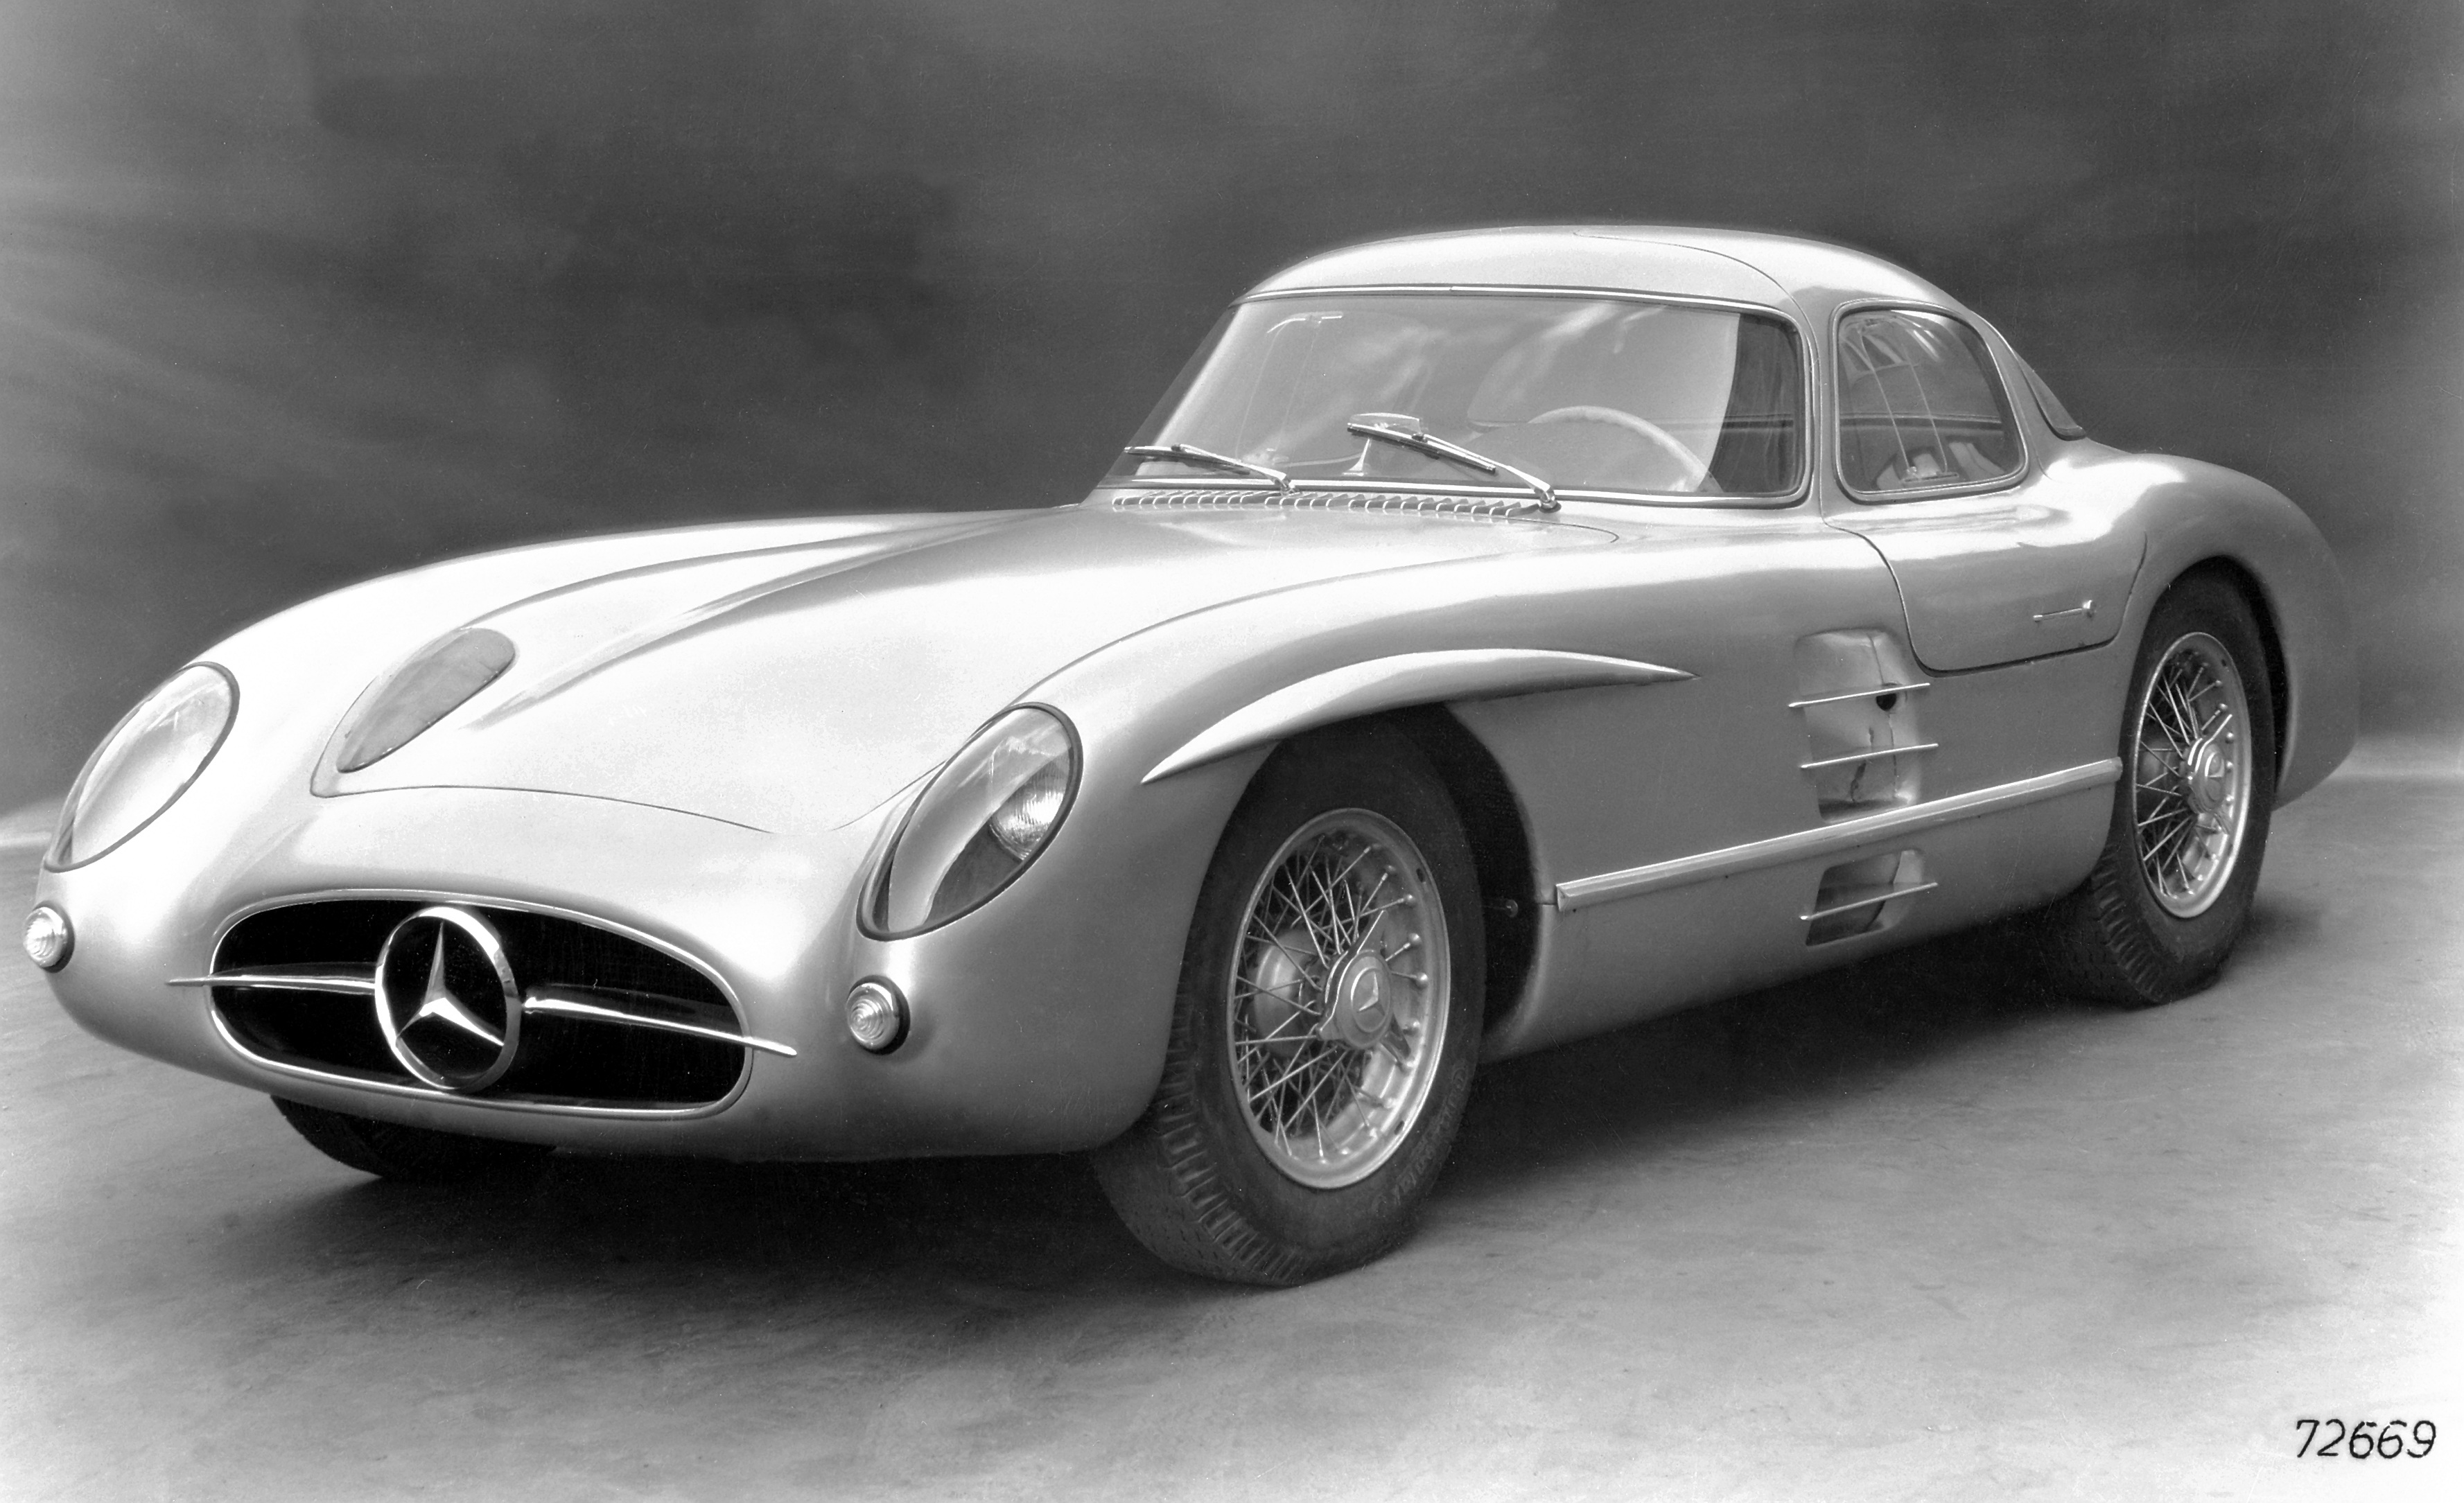 The Most Valuable Car In The World: The €135M Mercedes Benz 300 SLR Uhlenhaut Coupé. Automobiles. RM Sotheby's